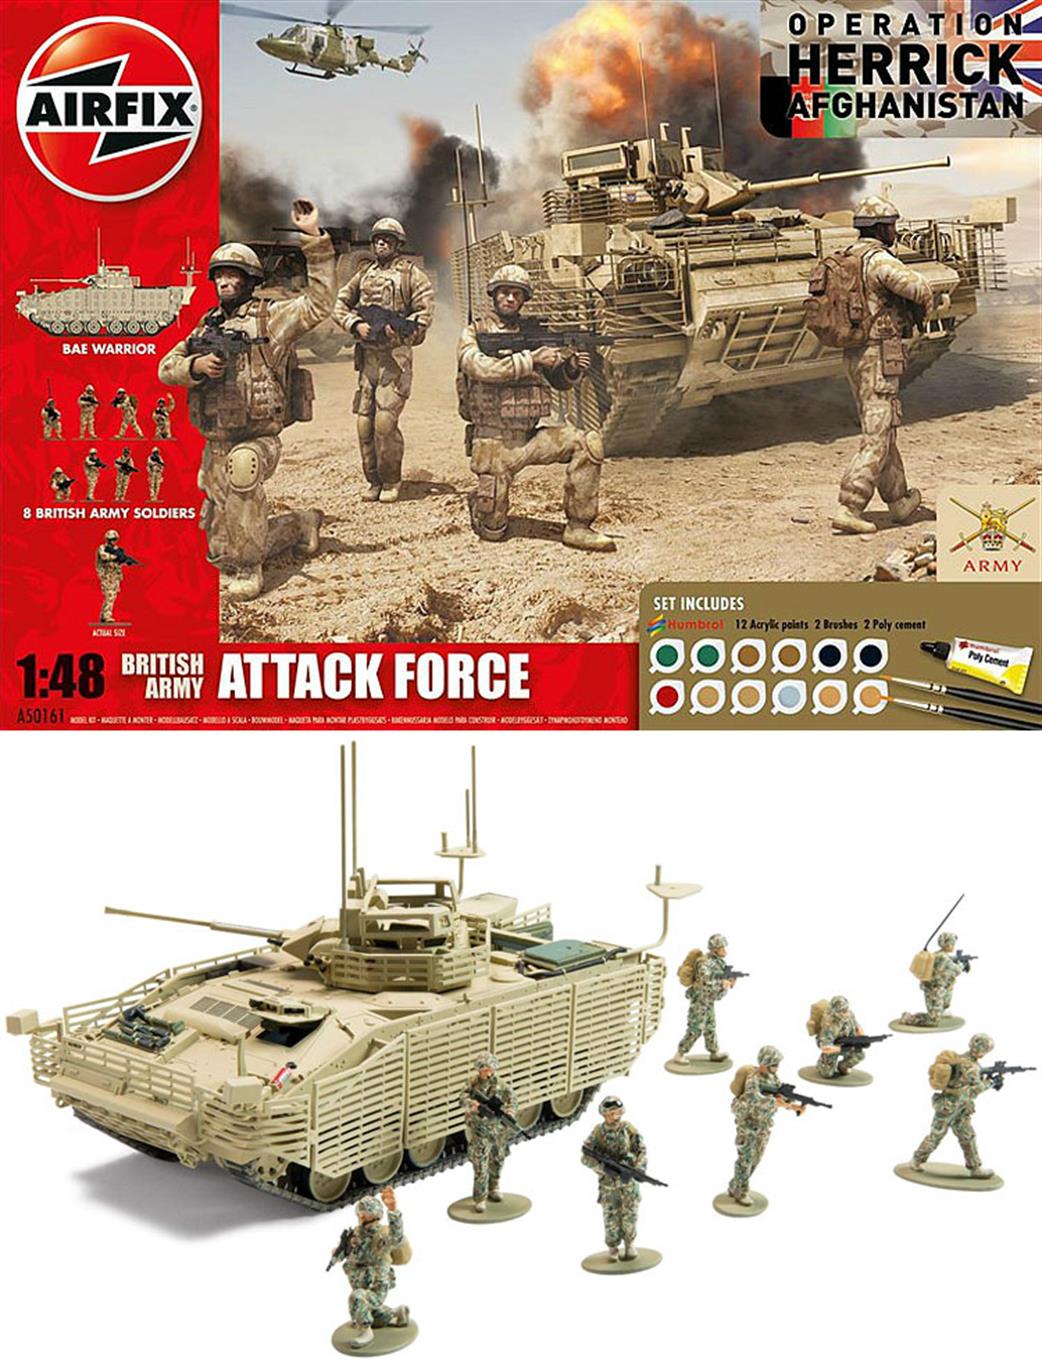 Airfix 1/48 A50161 British Army Attack Force Gift Set